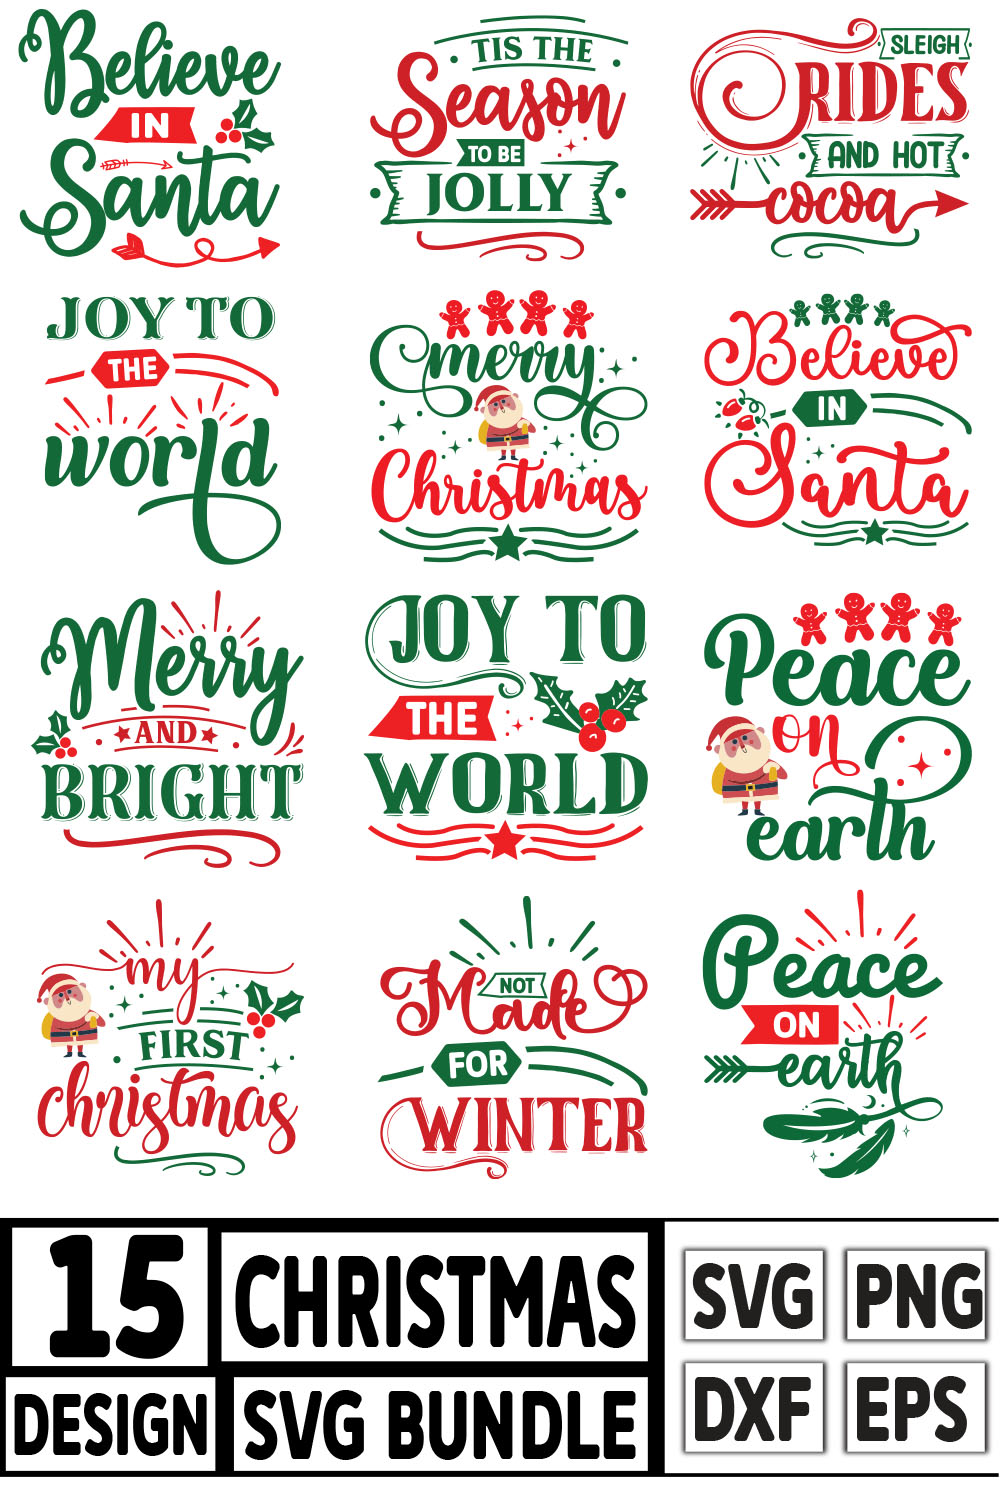 A set of unique images for prints on the theme of Christmas.